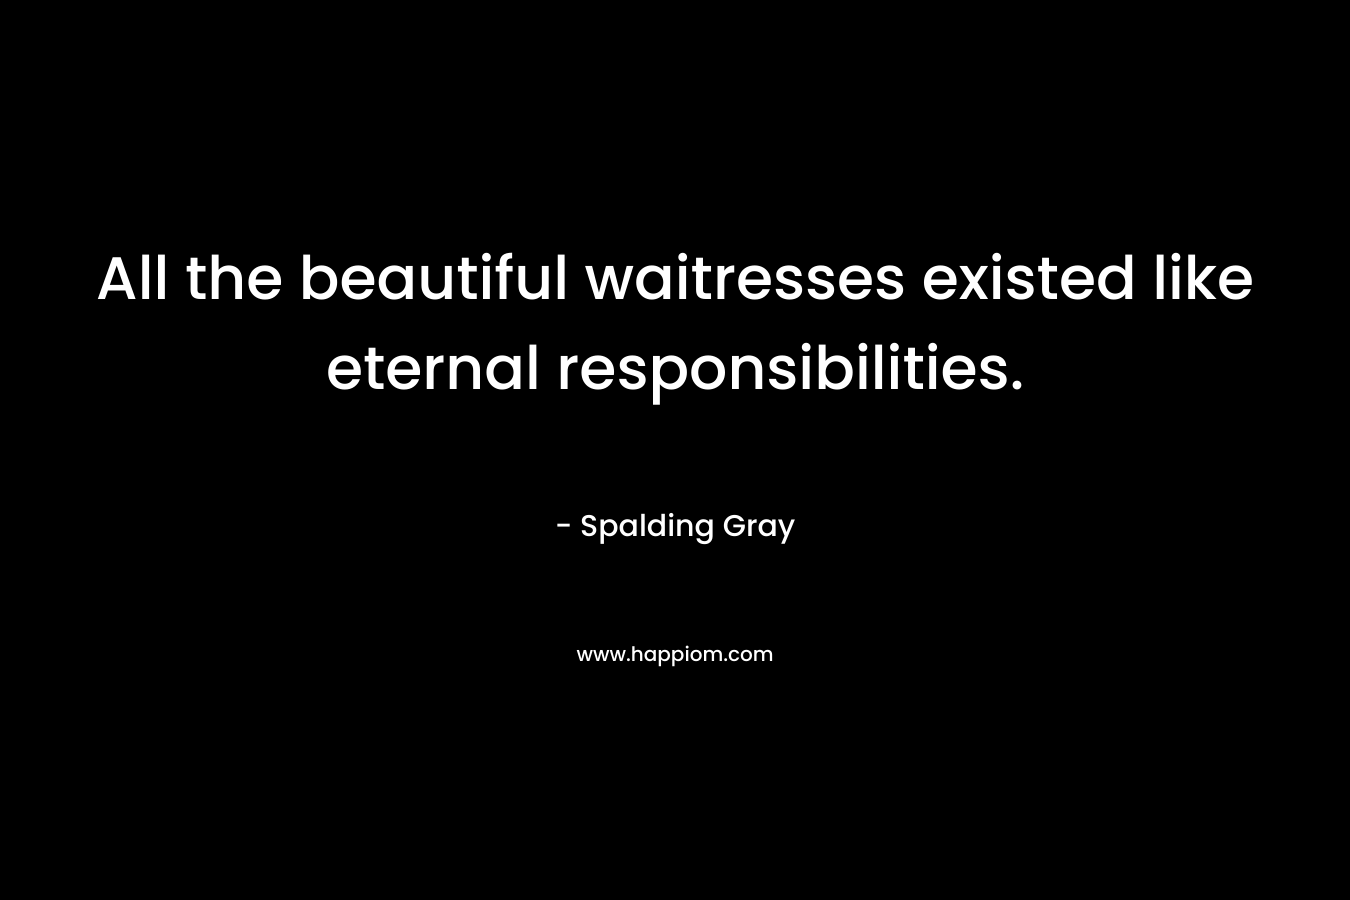 All the beautiful waitresses existed like eternal responsibilities.